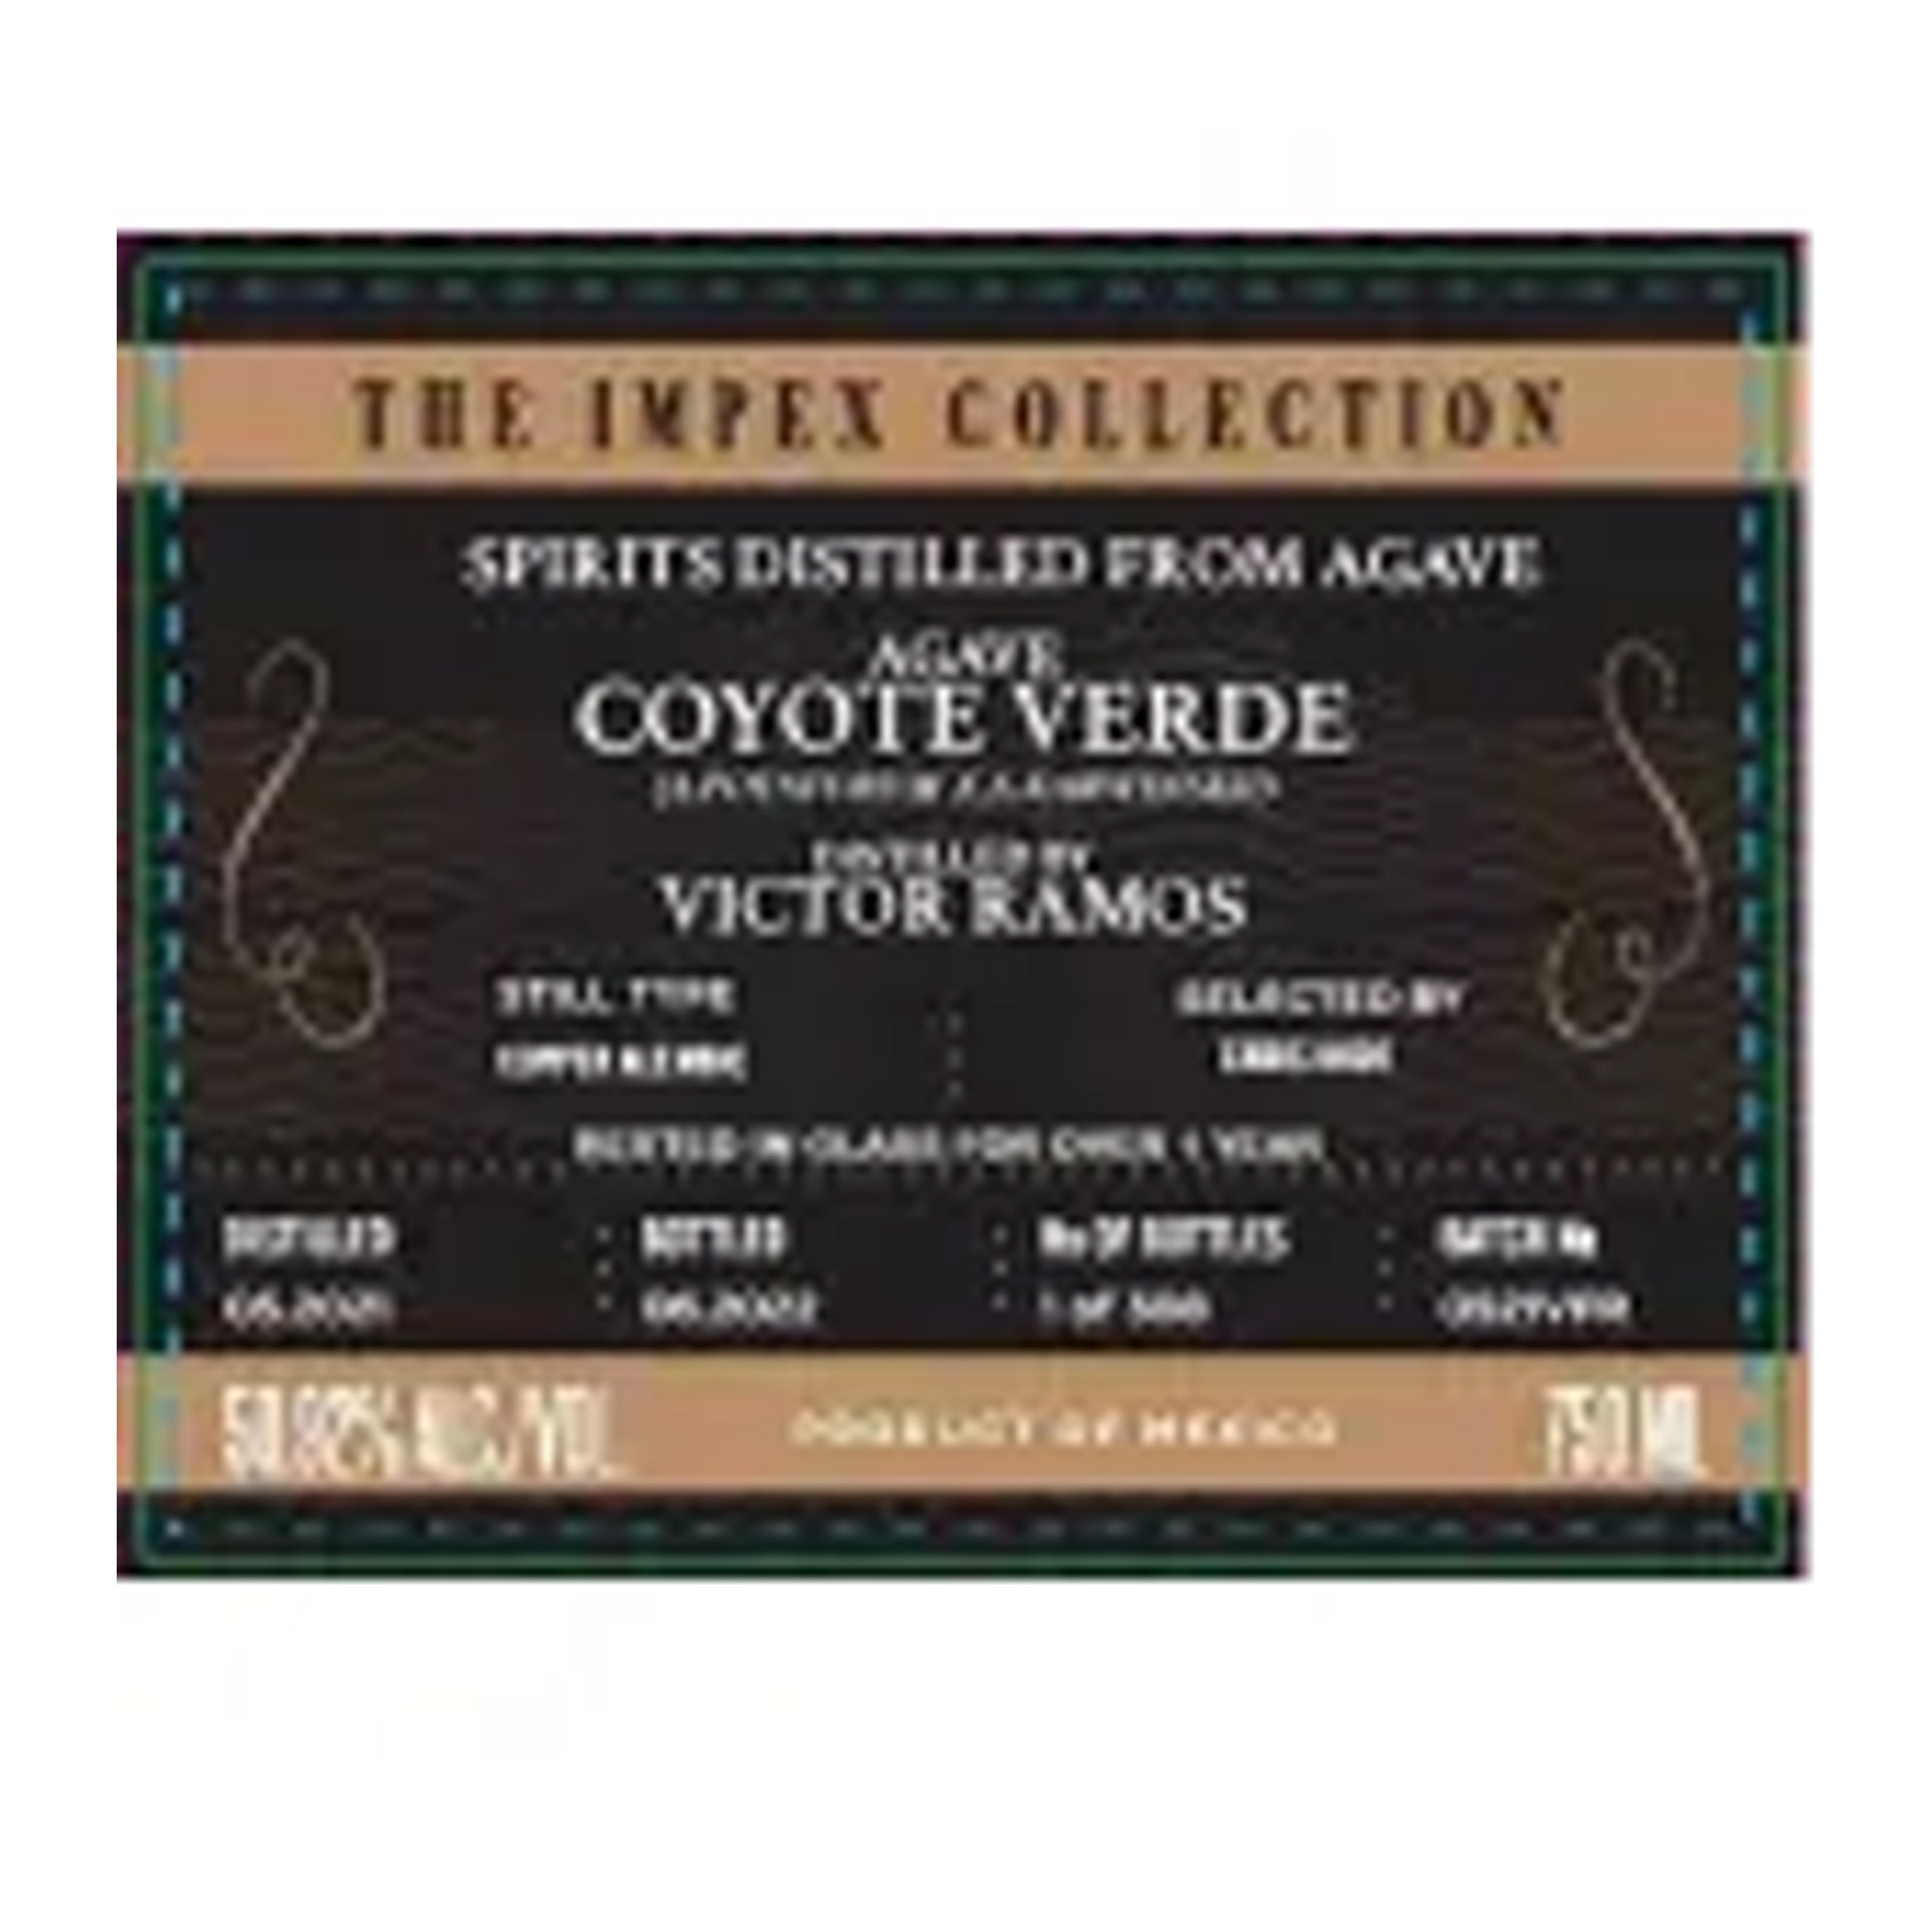 The Impex Collection Coyote Verde Victor Ramos Mezcal